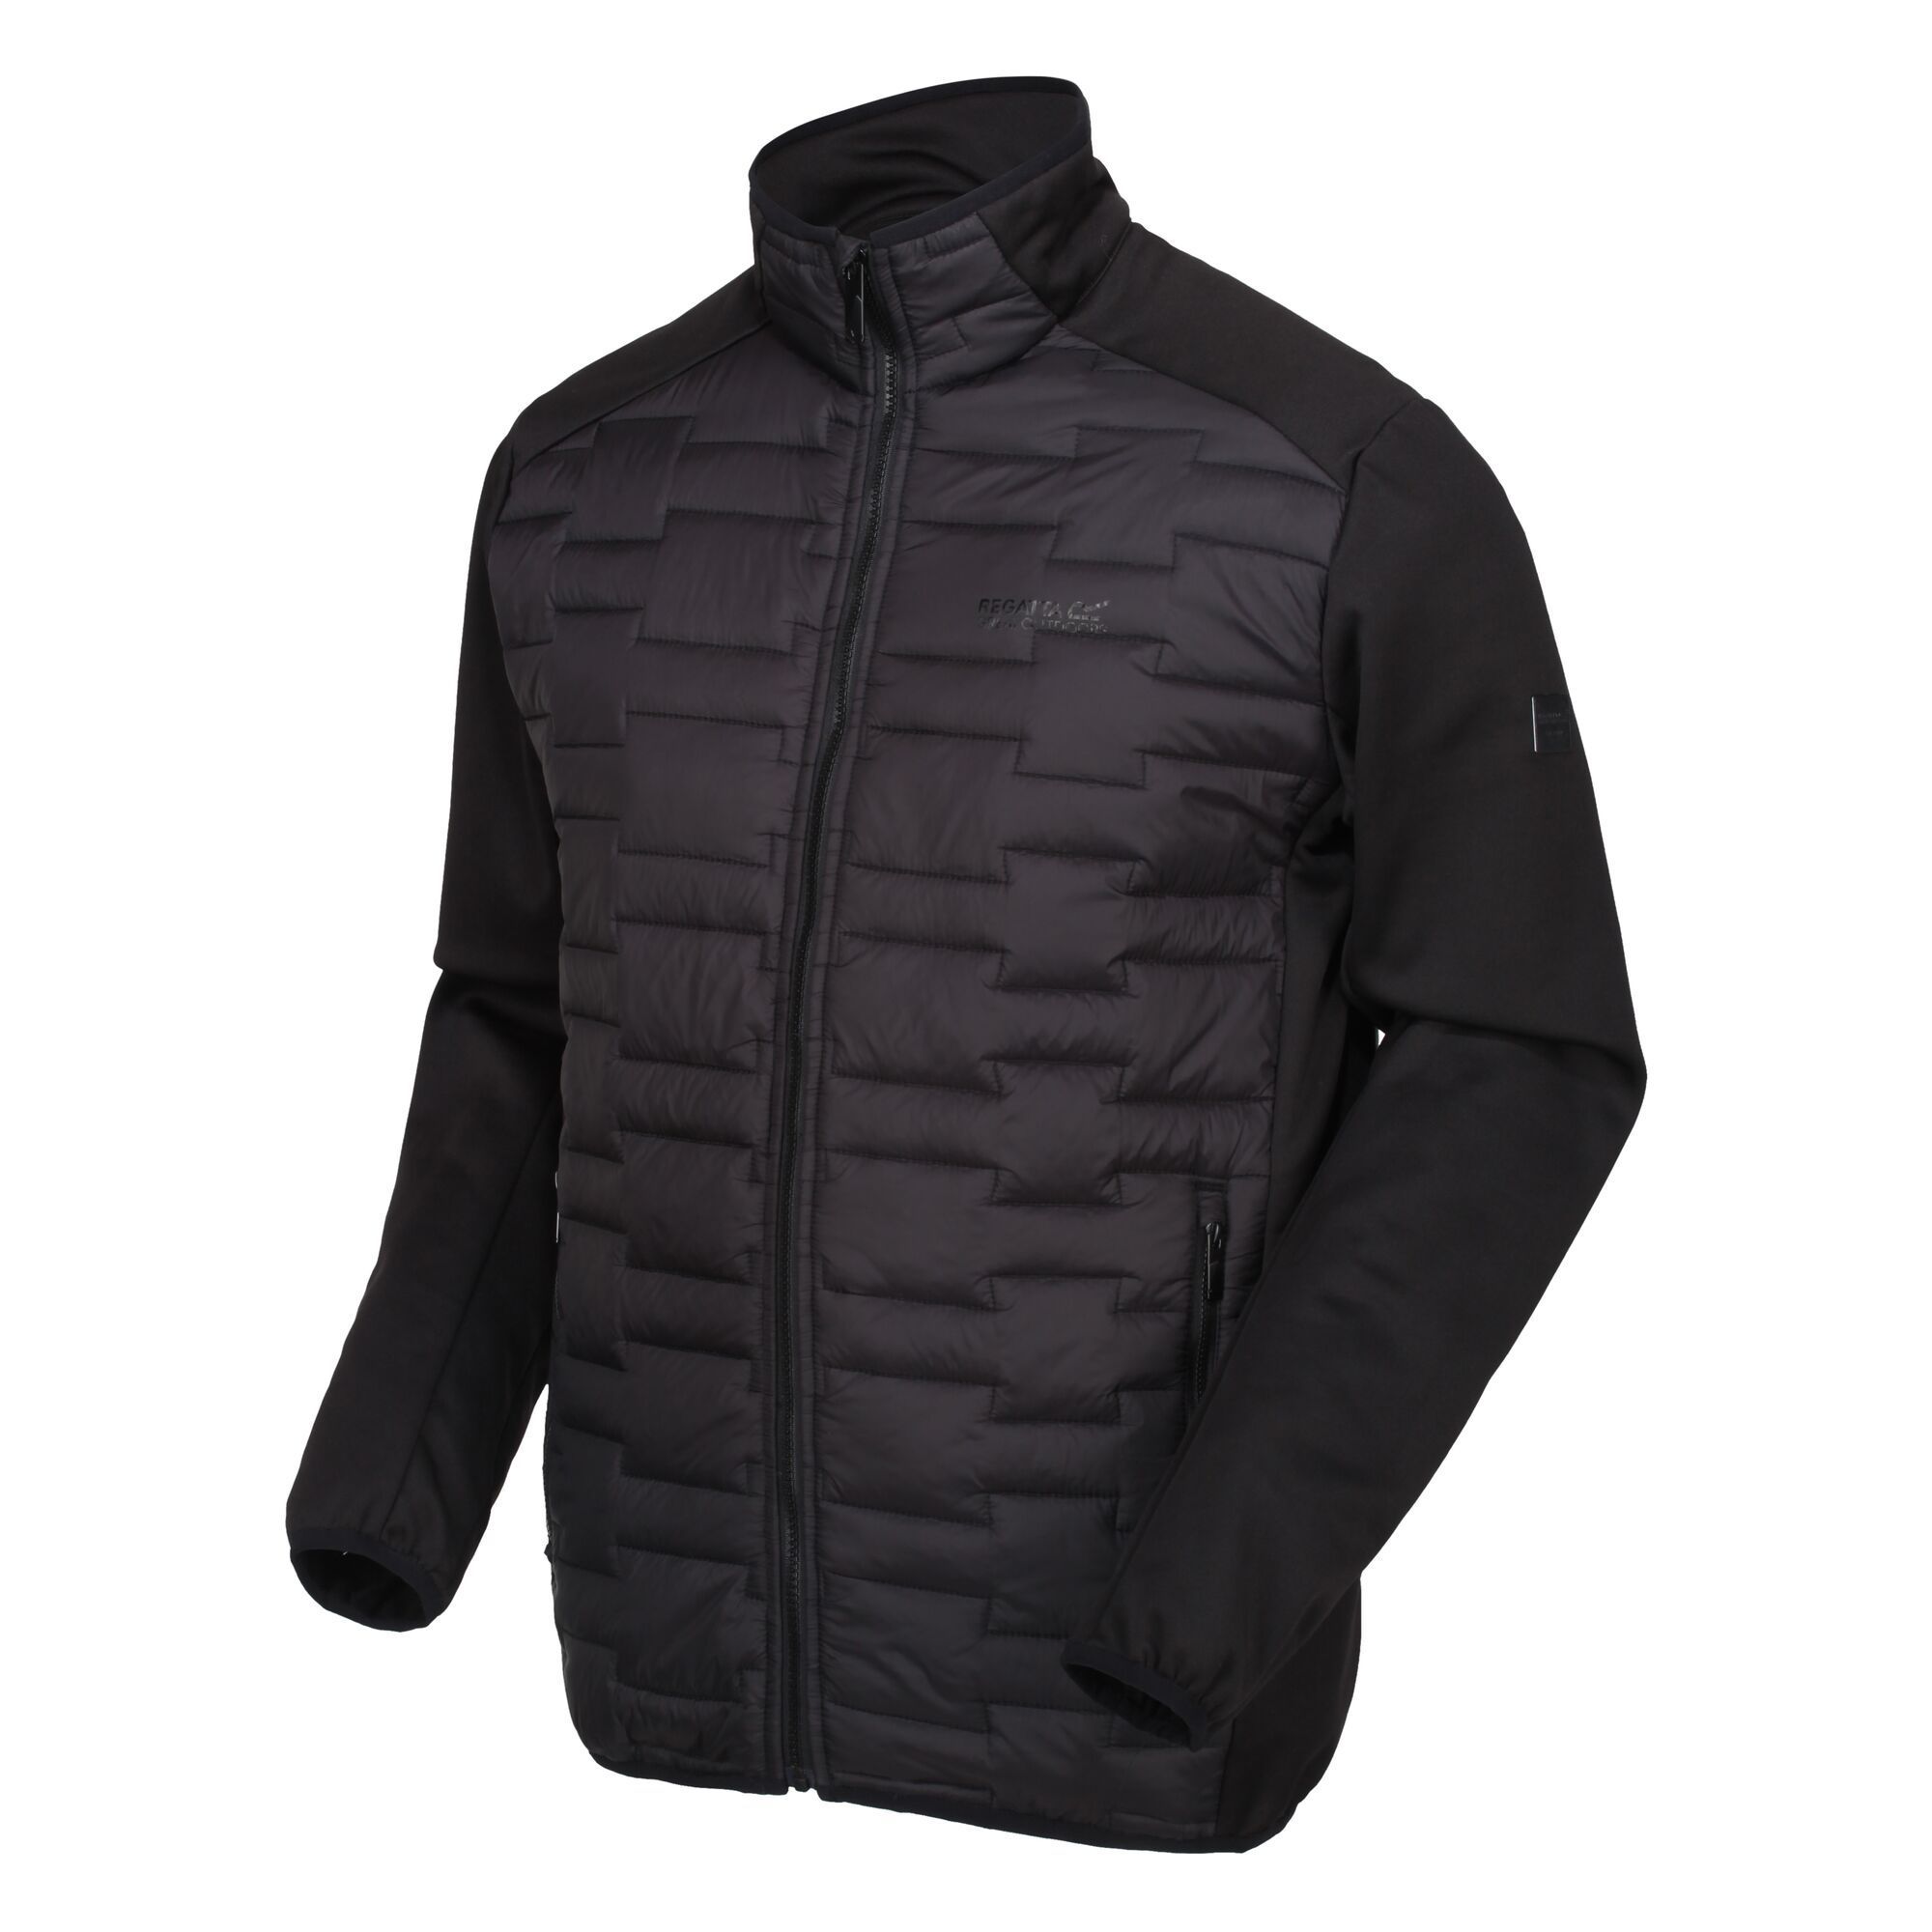 Material: 100% Polyamide. Fabric: Extol Stretch, Knitted, Warmloft. 235gsm. Design: Quilted. Compressible, Stretch Binding. Fabric Technology: Water Repellent. Neckline: High-Neck. Sleeve-Type: Long-Sleeved. Cuff: Stretch. Pockets: 2 Zip Pockets. Fastening: Full Zip, Zip Guard.